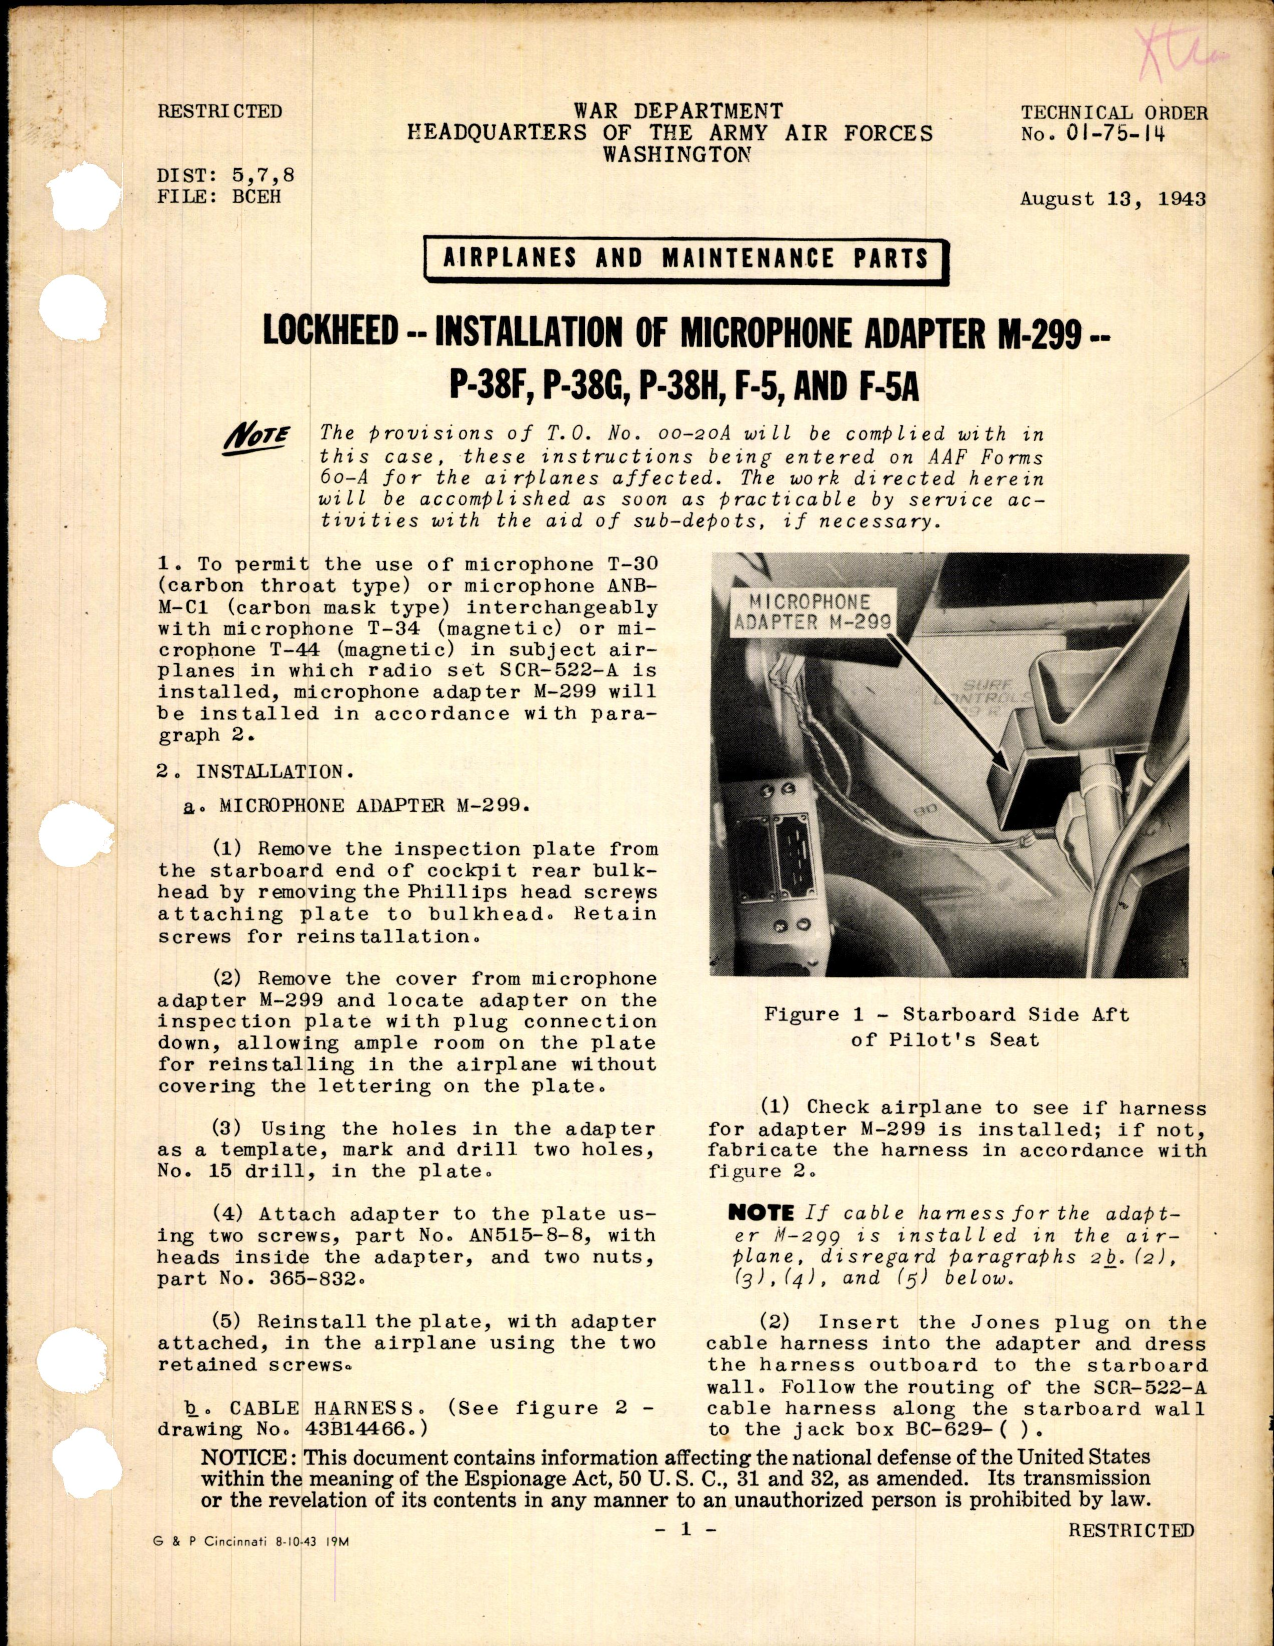 Sample page 1 from AirCorps Library document: Installation of Microphone Adapter M-299 for P-38F, G, H, F-5, and F-5A